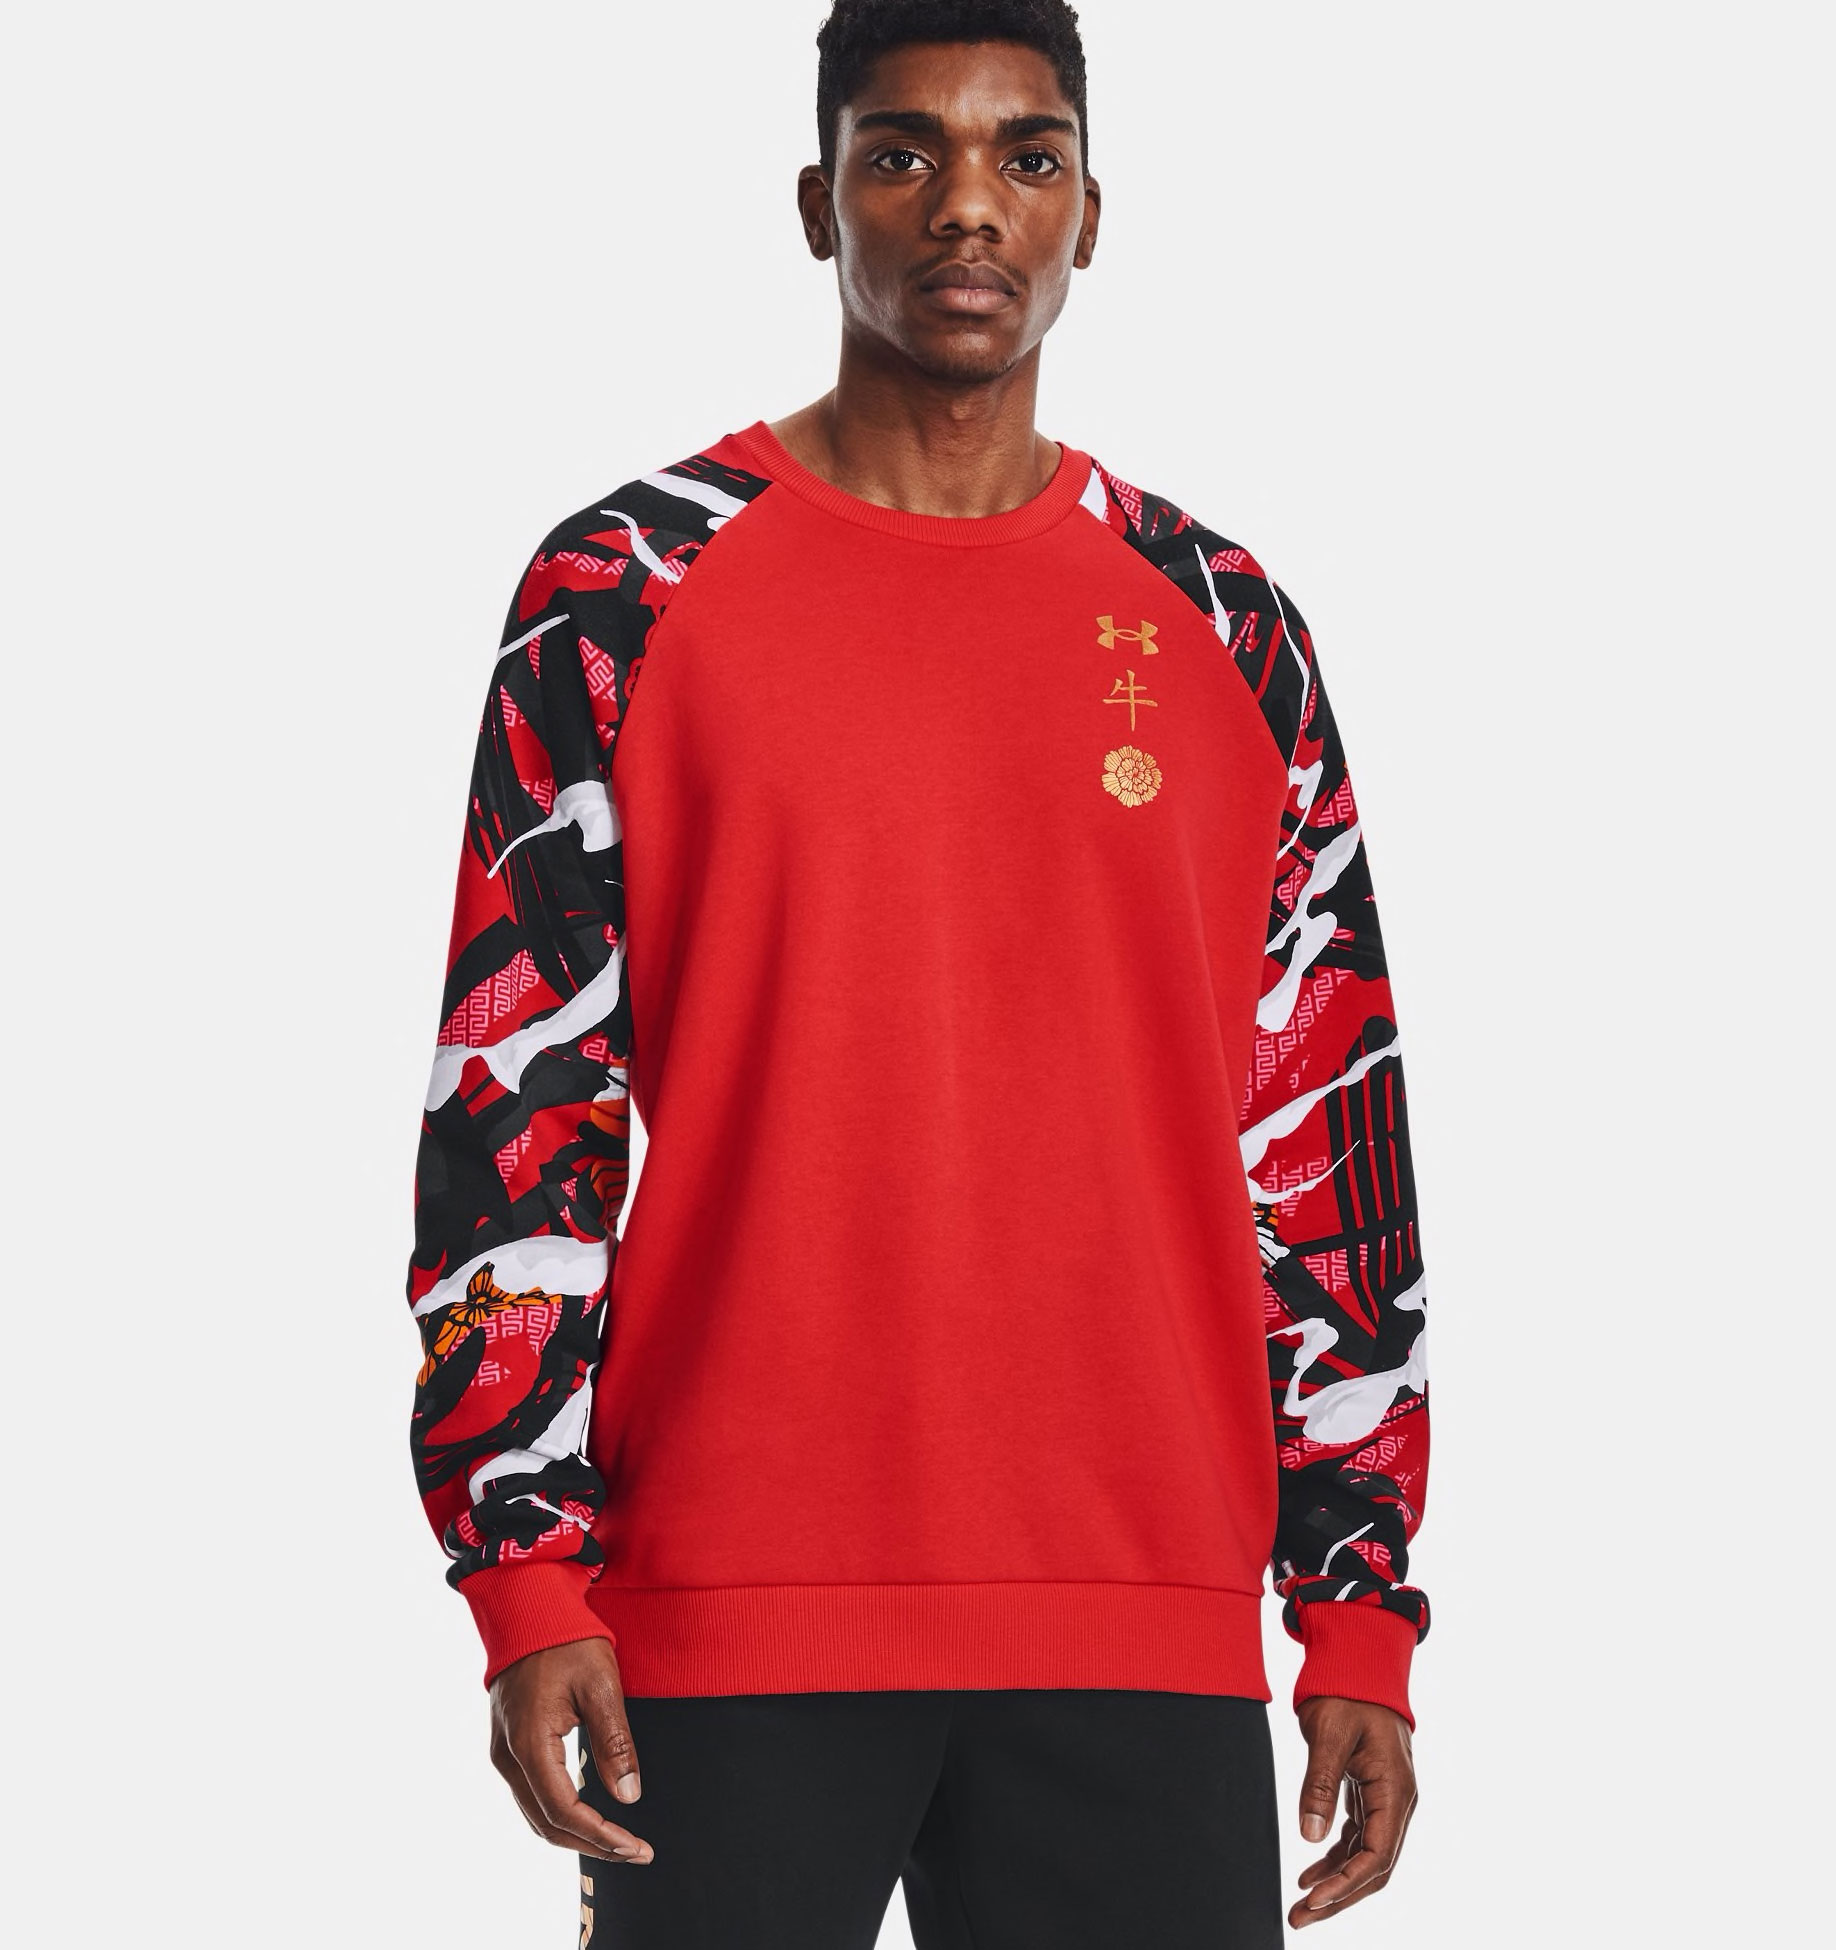 under-armour-chinese-new-year-curry-8-cny-sweatshirt